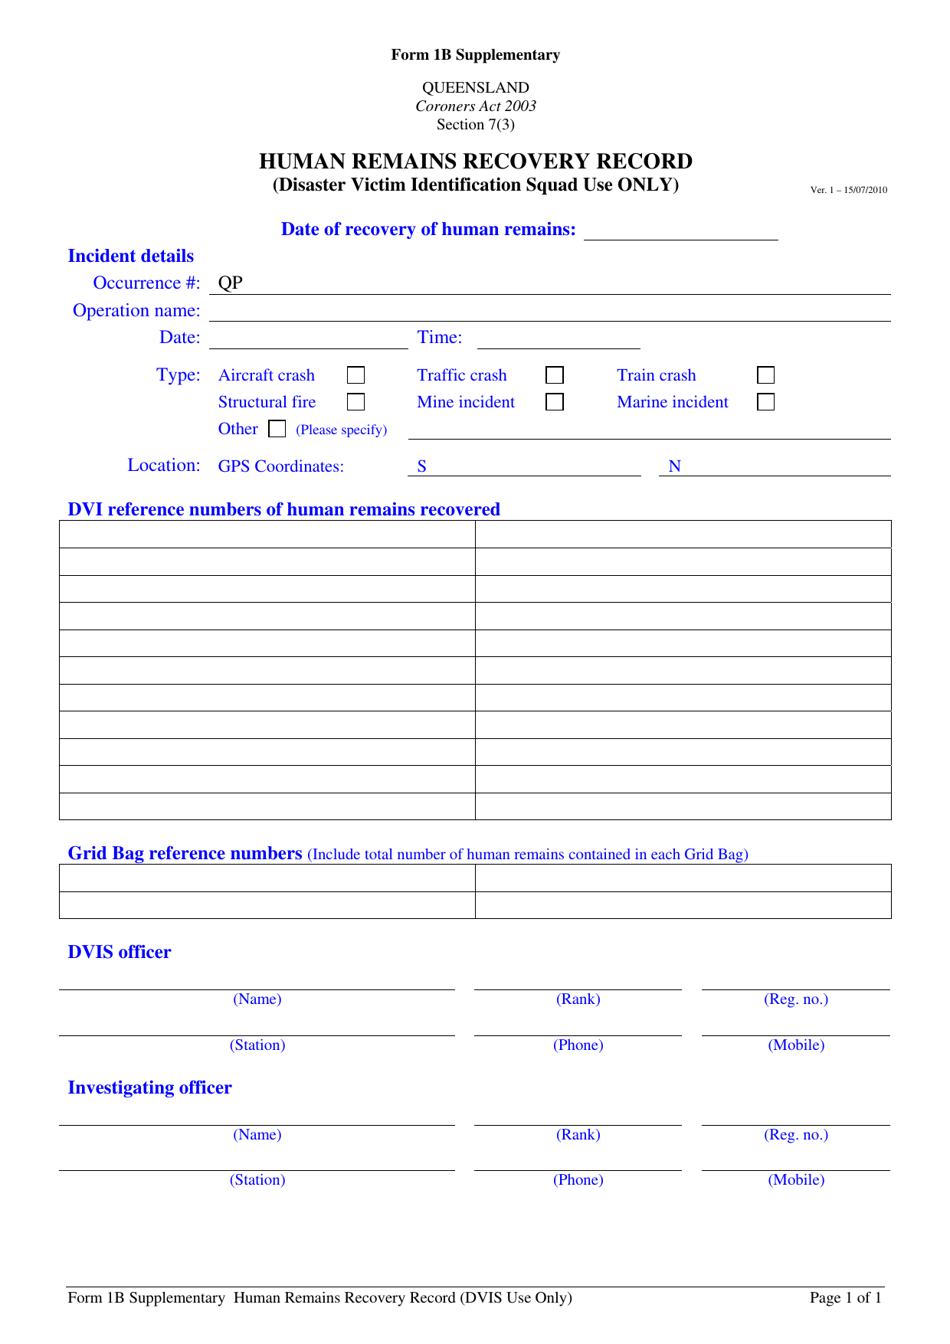 Form 1B SUPPLEMENTARY Human Remains Recovery Record - Queensland, Australia, Page 1